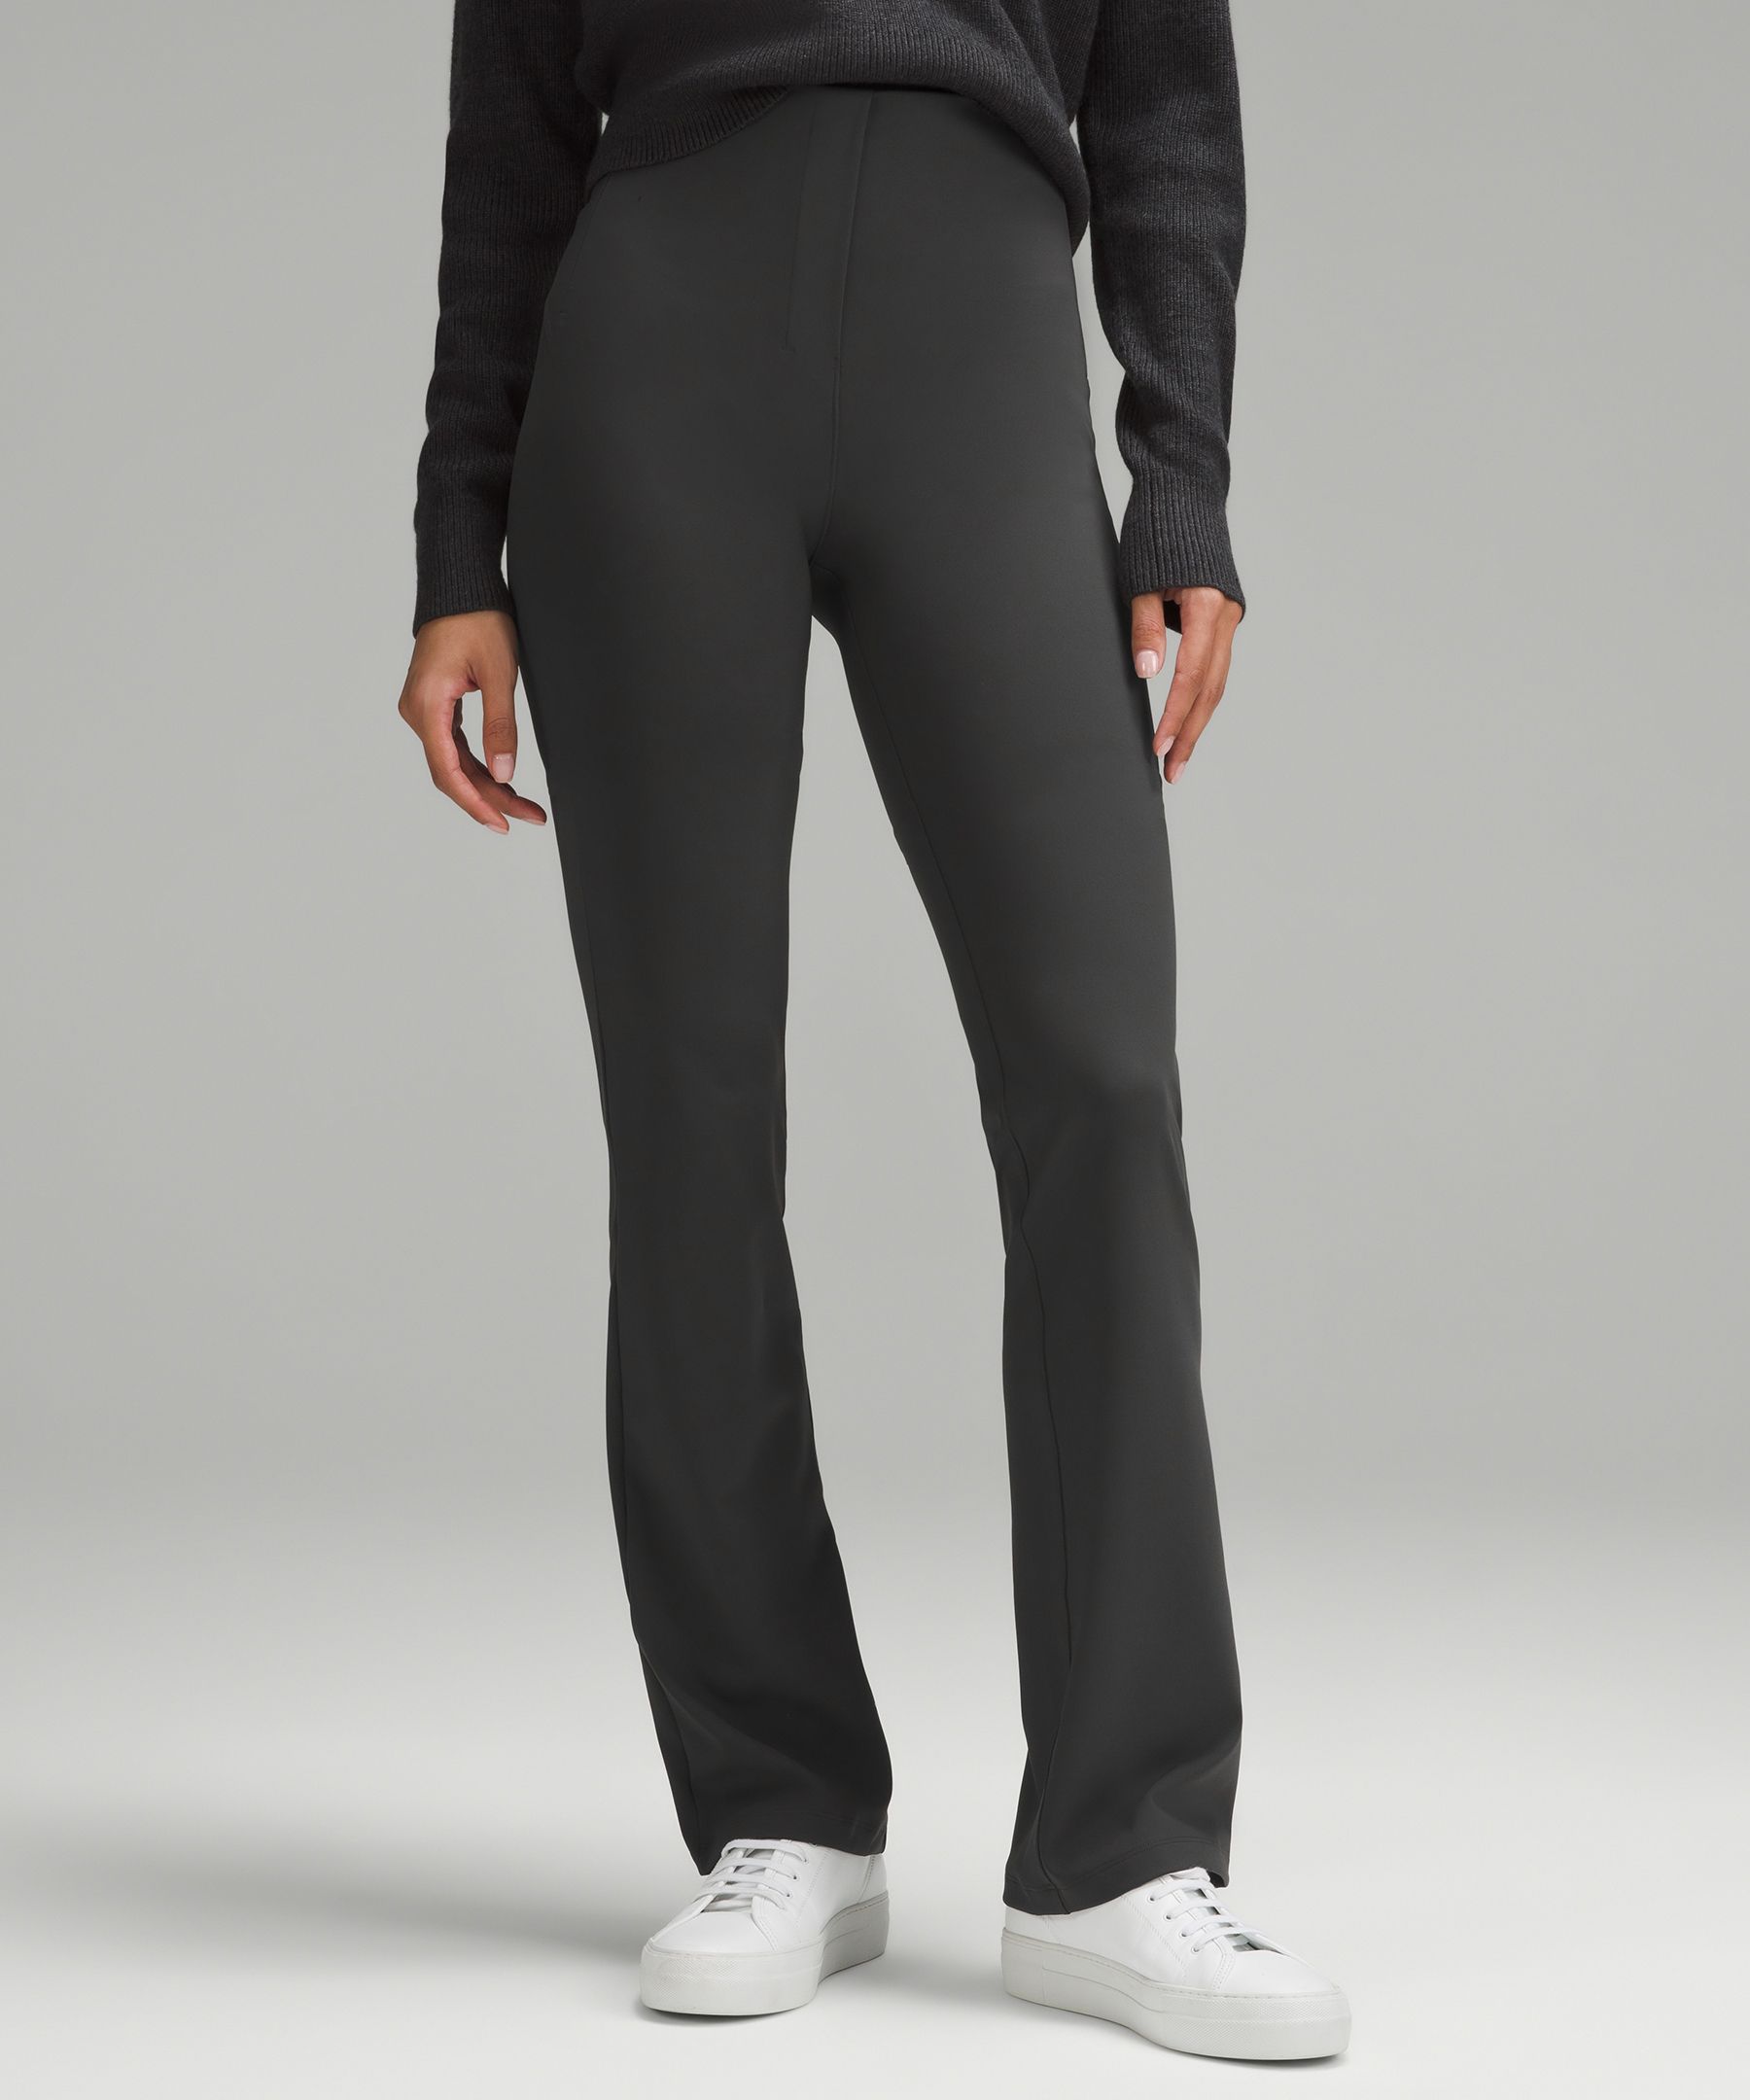 Lululemon Smooth Fit Pull-on High-rise Pants Tall